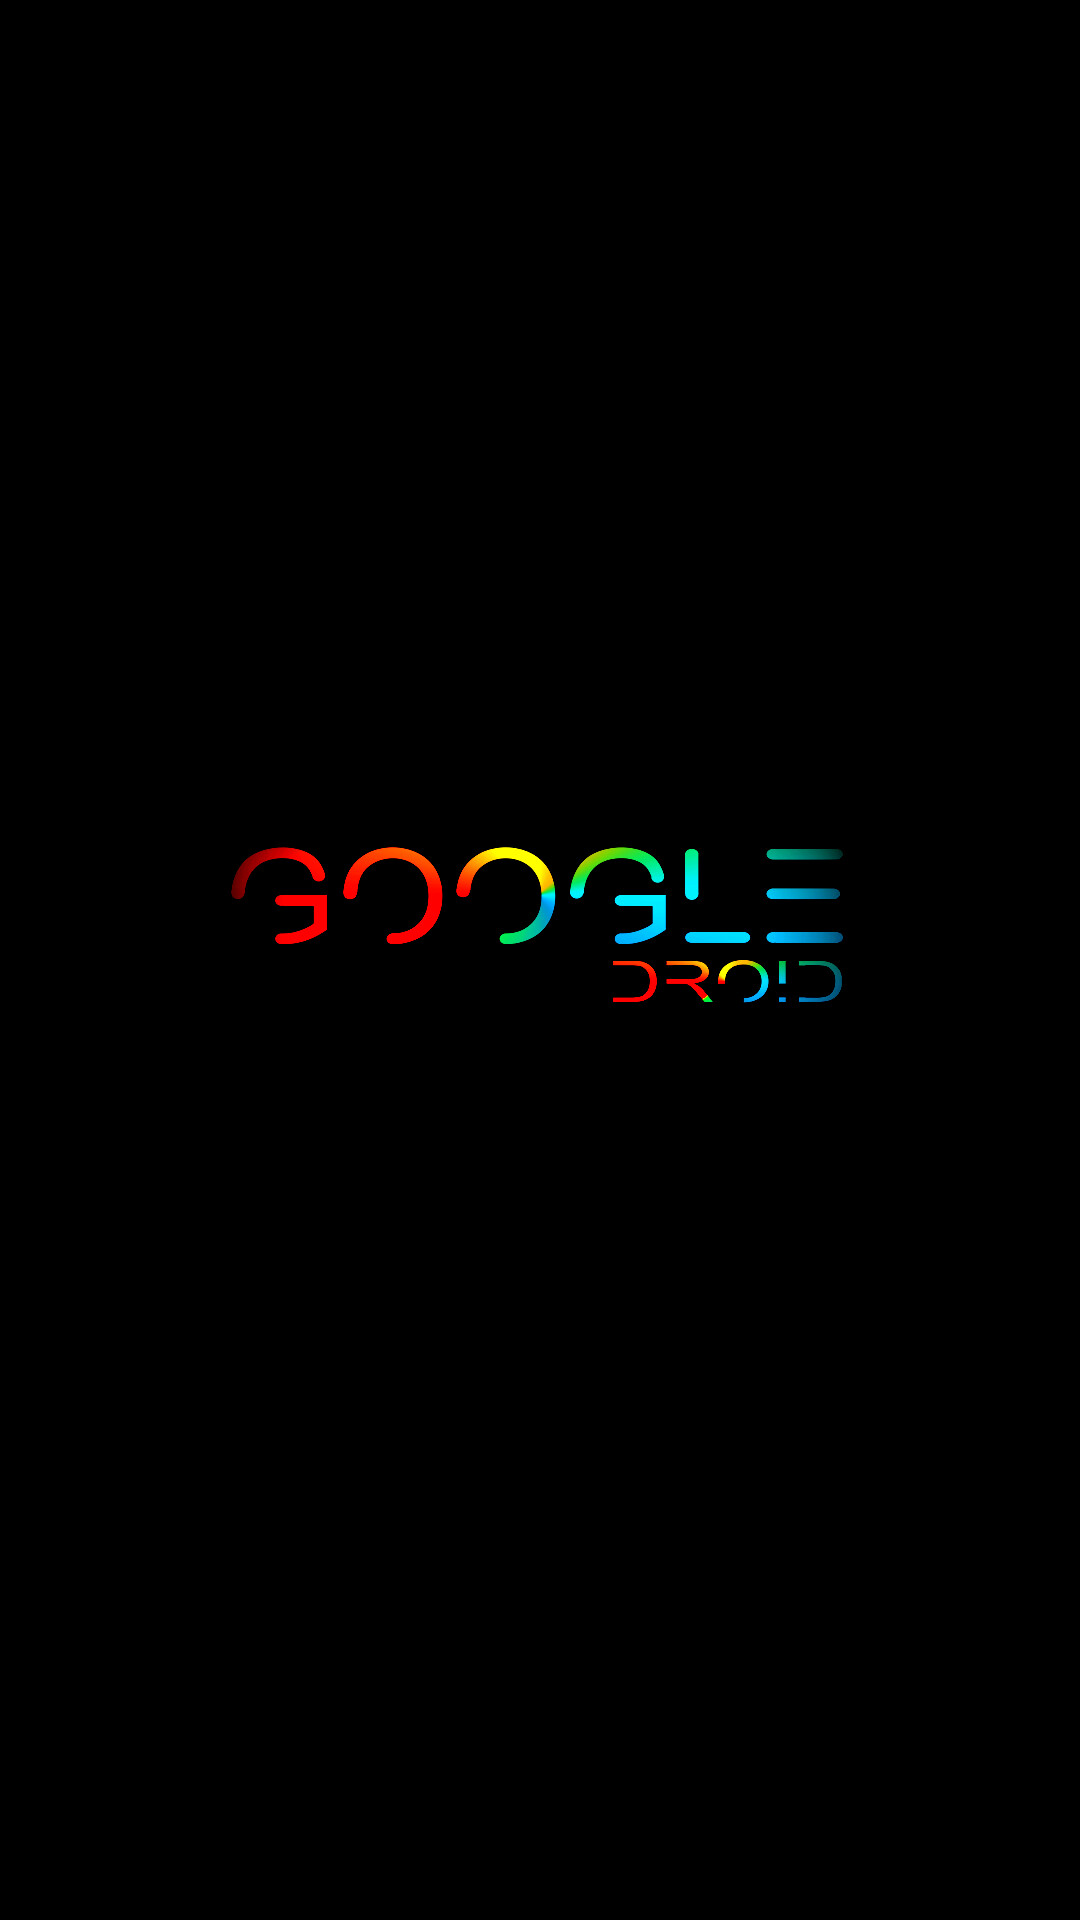 Google: Sundar Pichai was appointed CEO of the company on October 24, 2015. 1080x1920 Full HD Wallpaper.